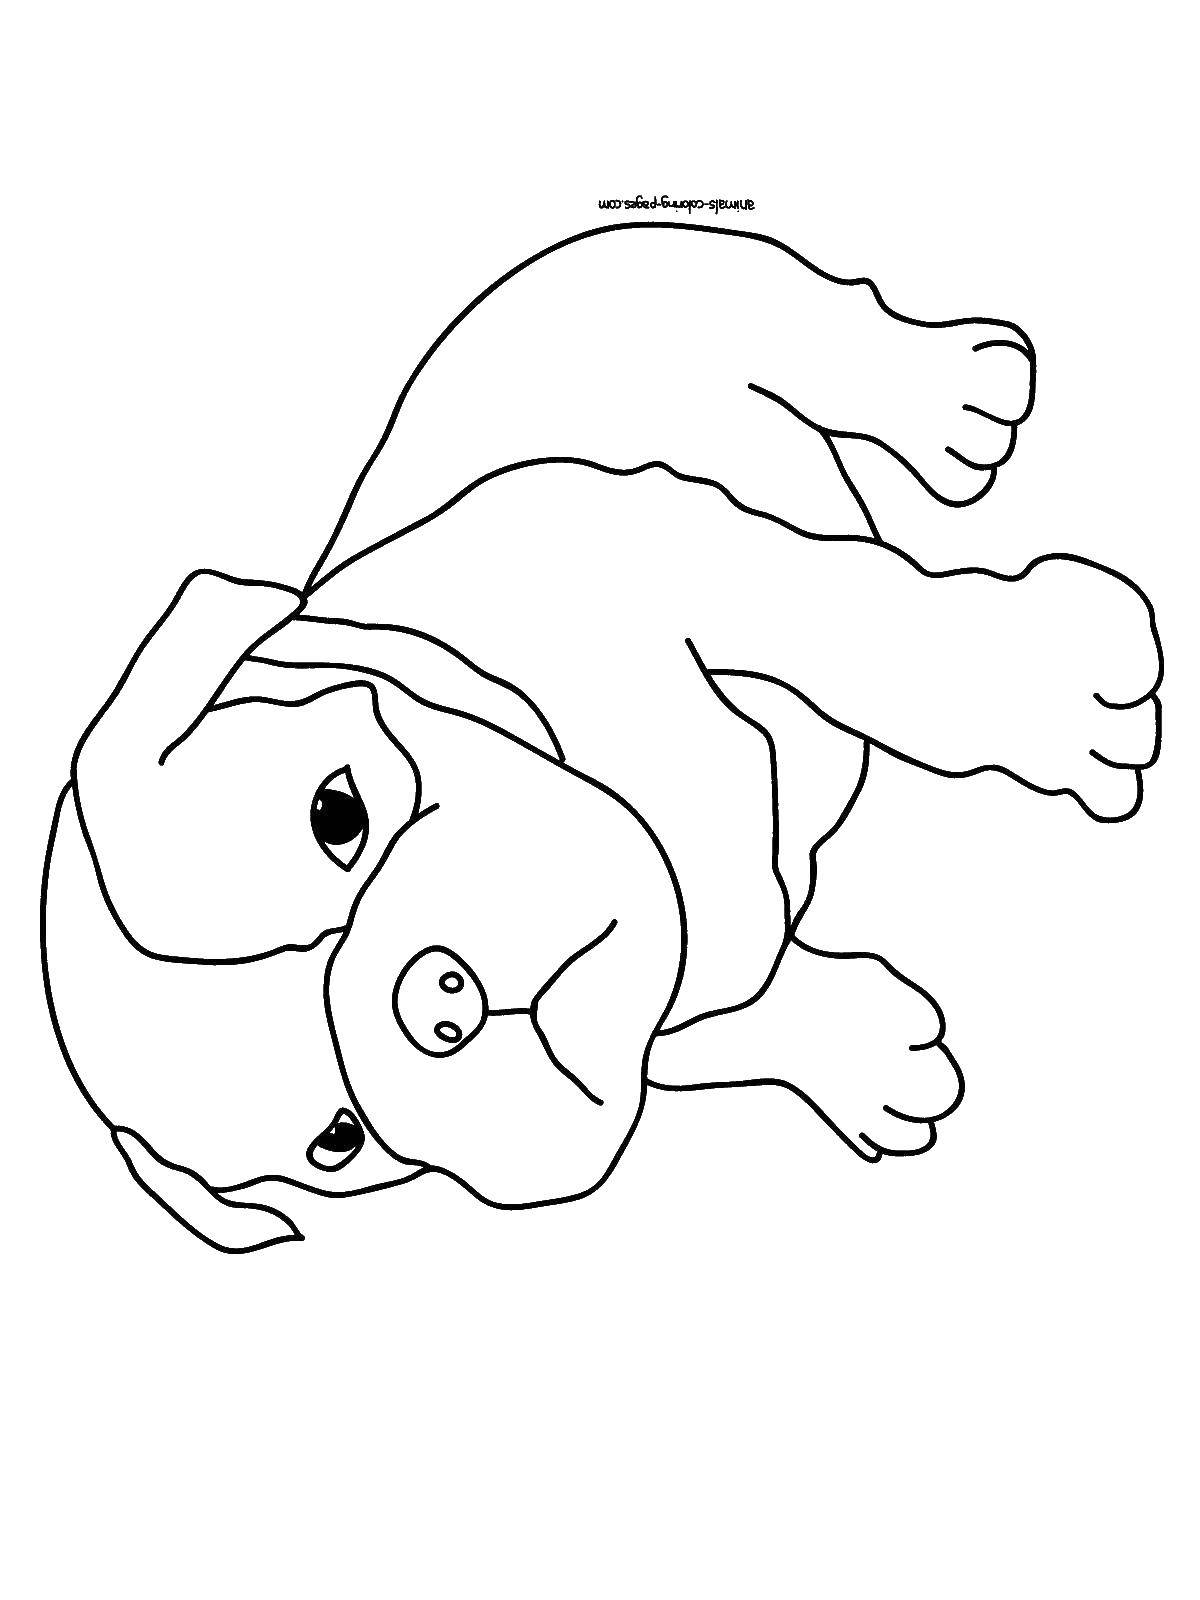 Coloring The puppy French bulldog. Category dogs. Tags:  puppy, bulldog, ears.